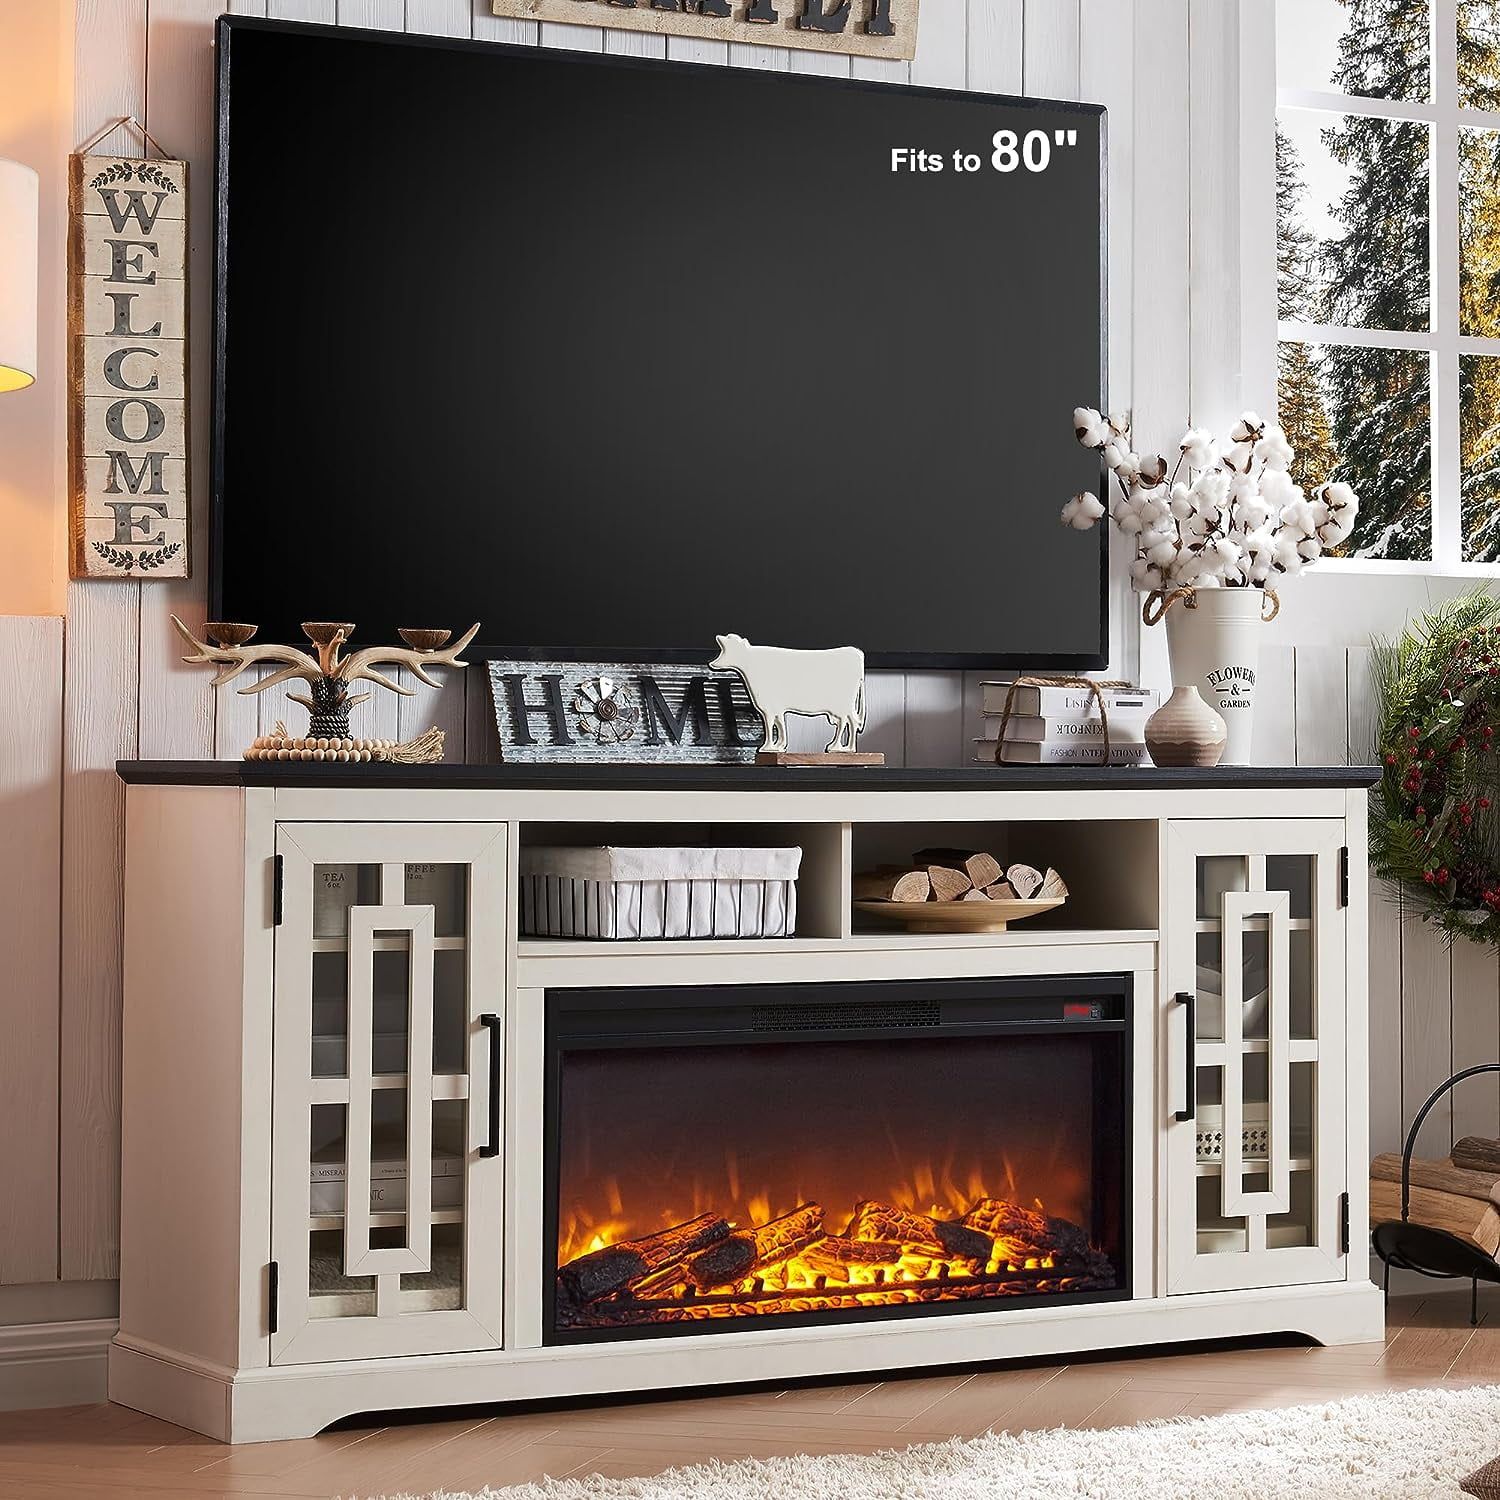 T4Tream 70" Fireplace Tv Stand For 75 80 Inch Tv, Farmhouse Highboy  Entertainment Center With Storage For Living Room, White – Walmart Inside Wood Highboy Fireplace Tv Stands (View 2 of 15)